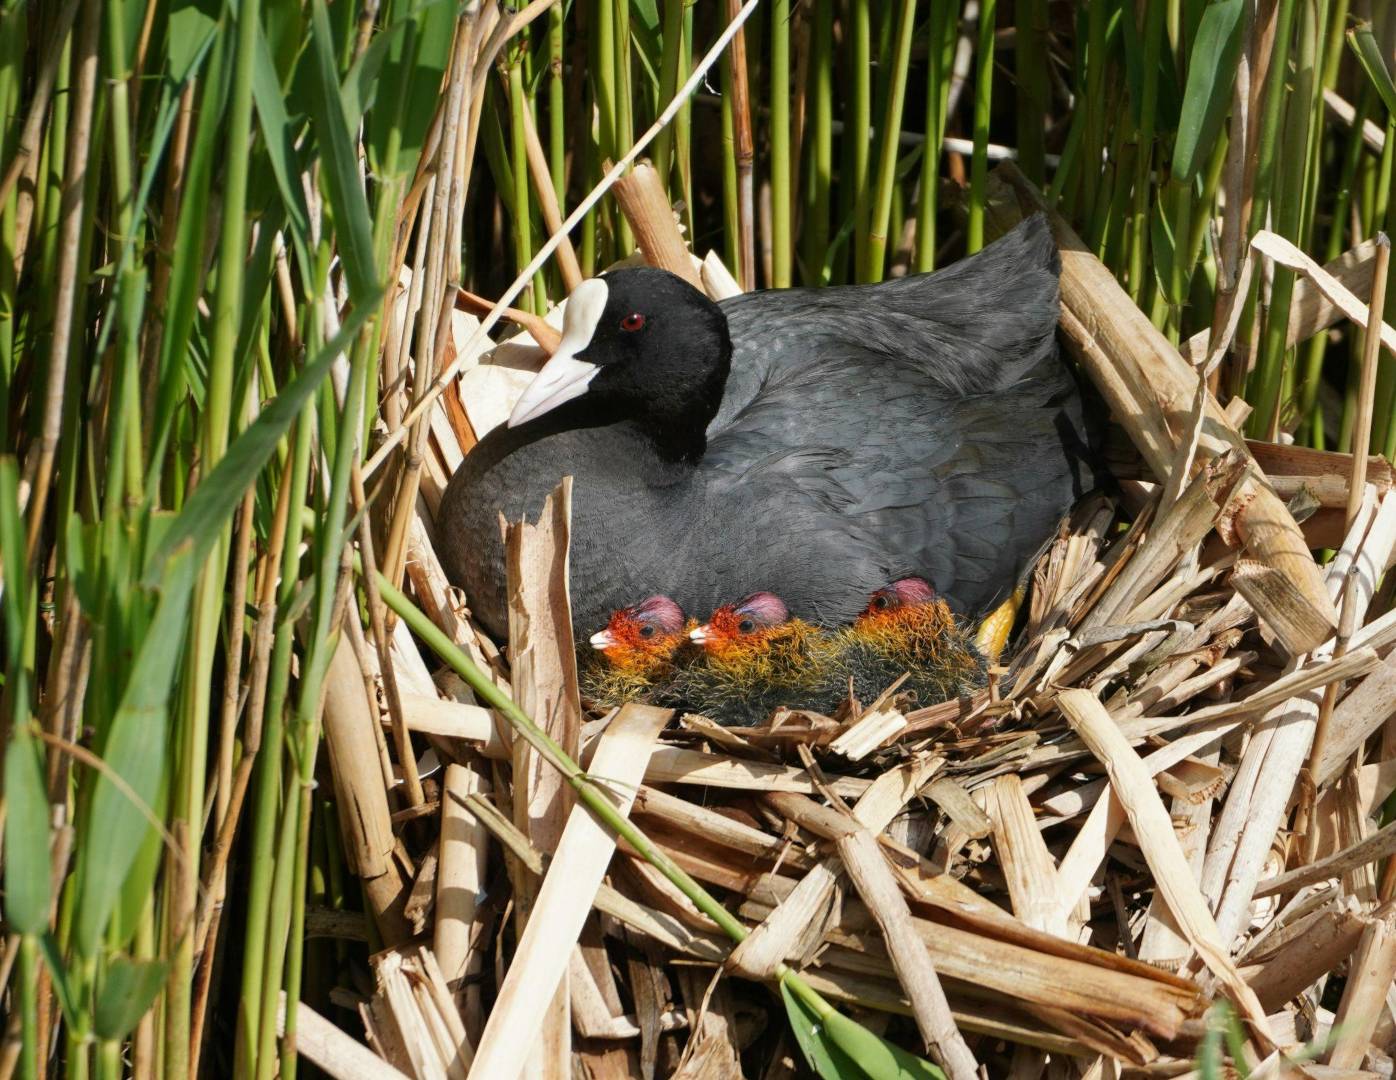 An American Coot bird with three chicks sitting in their nest